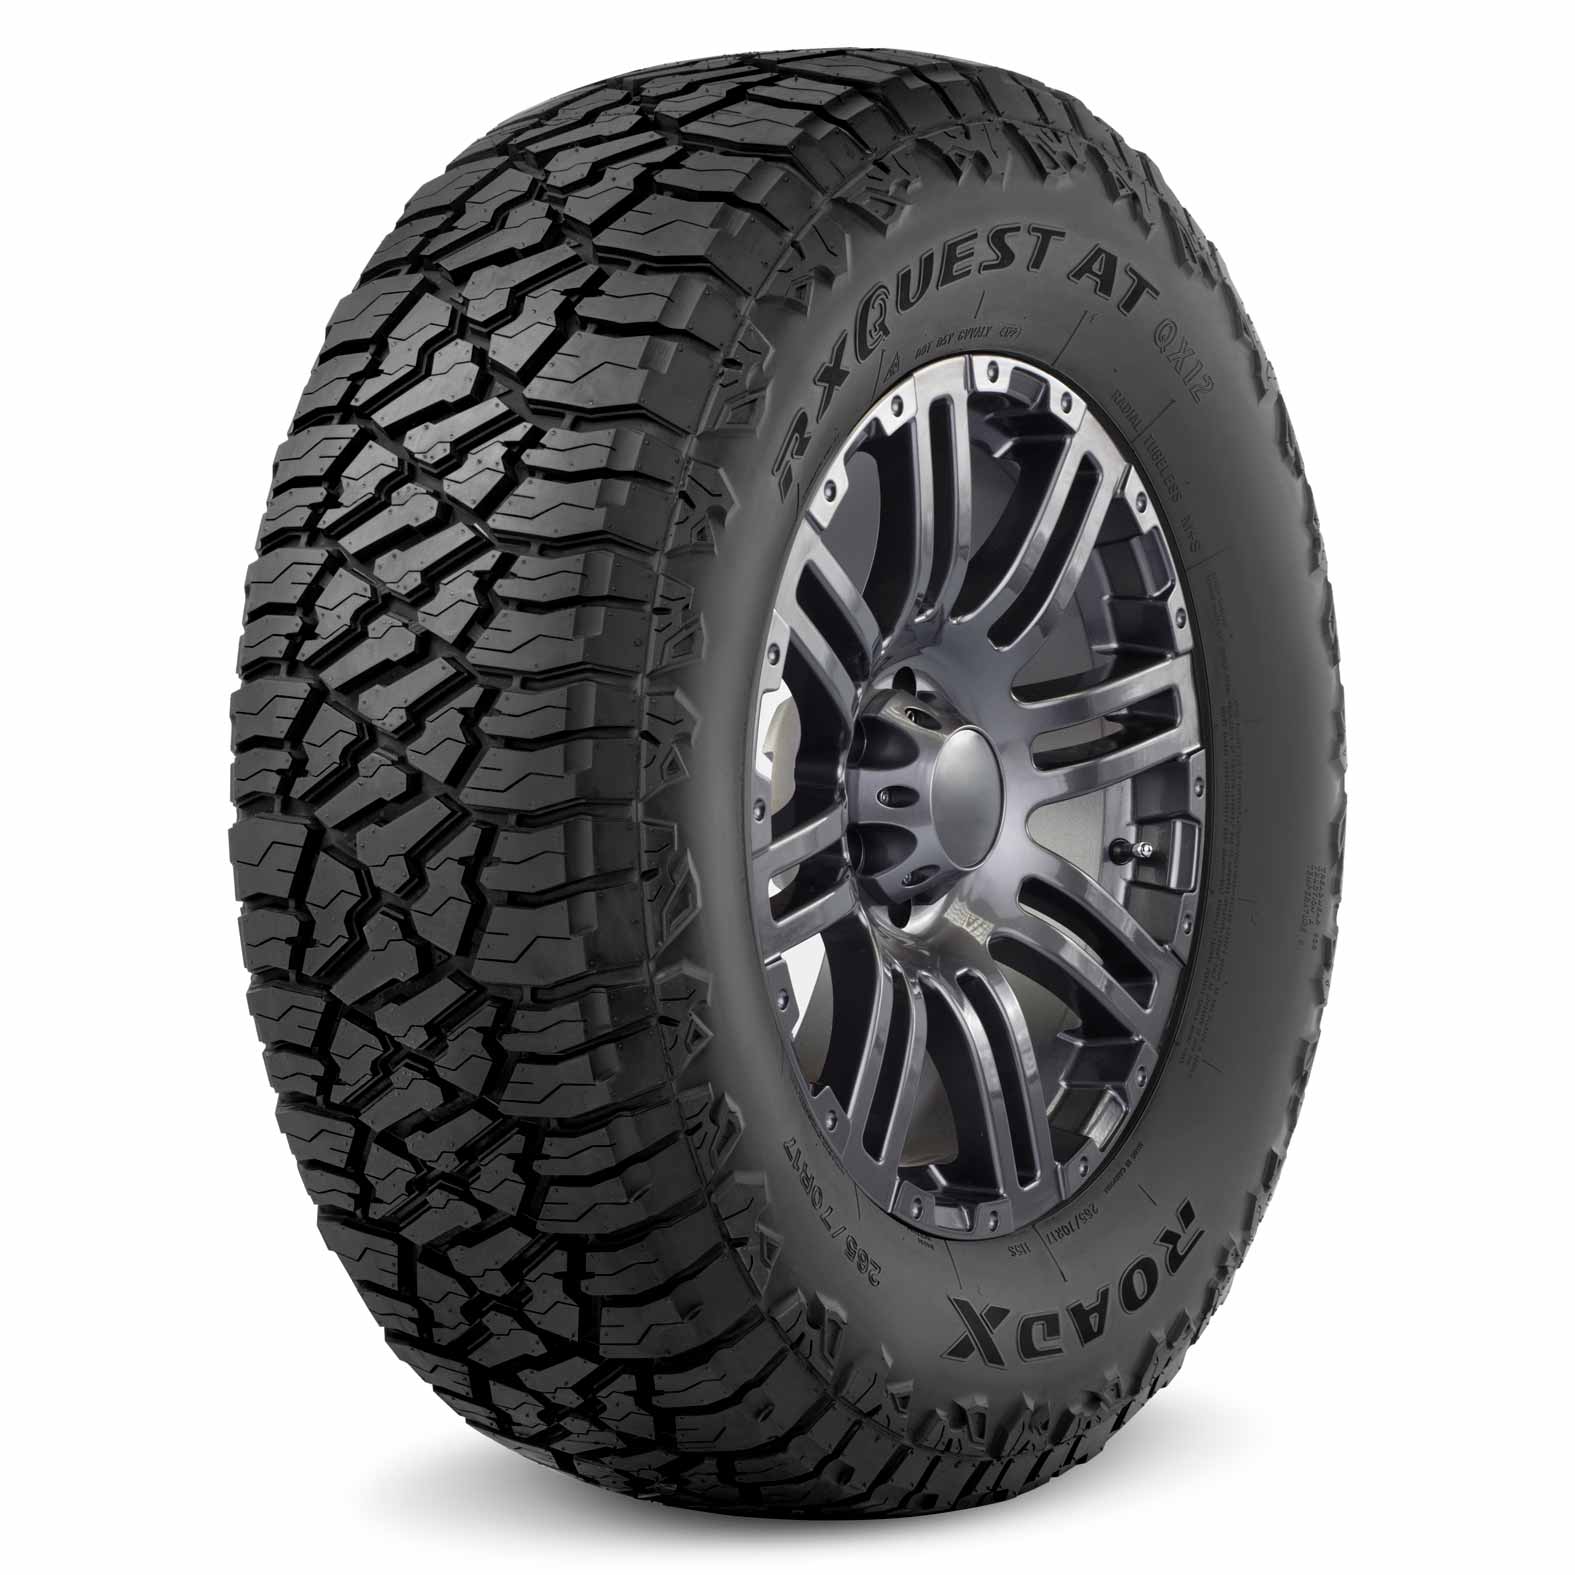 All-Terrain Tires and Off-Road Tires